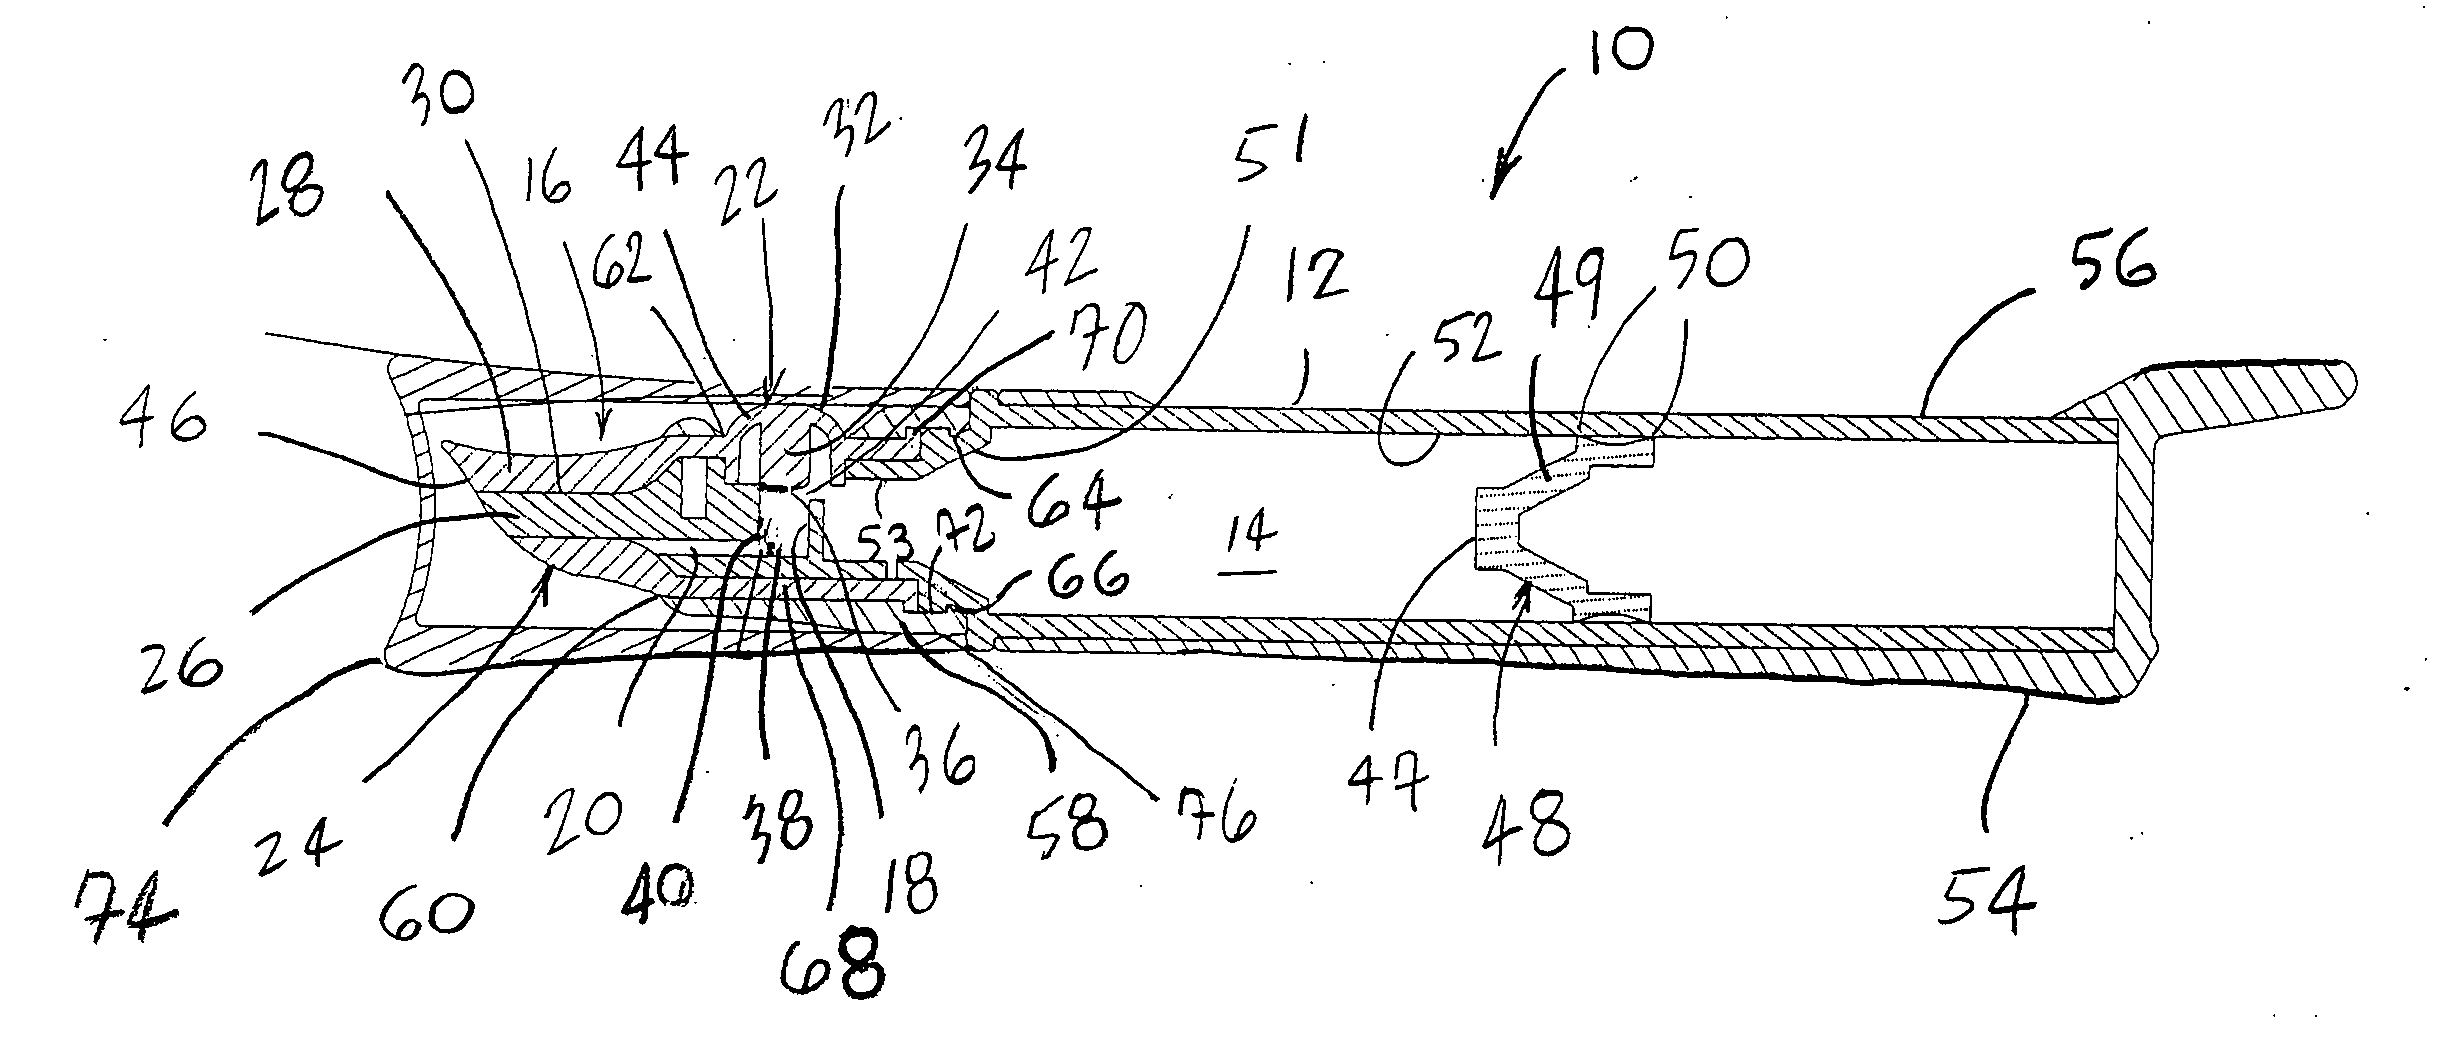 Laterally-actuated dispenser with one-way valve for storing and dispensing metered amounts of substances